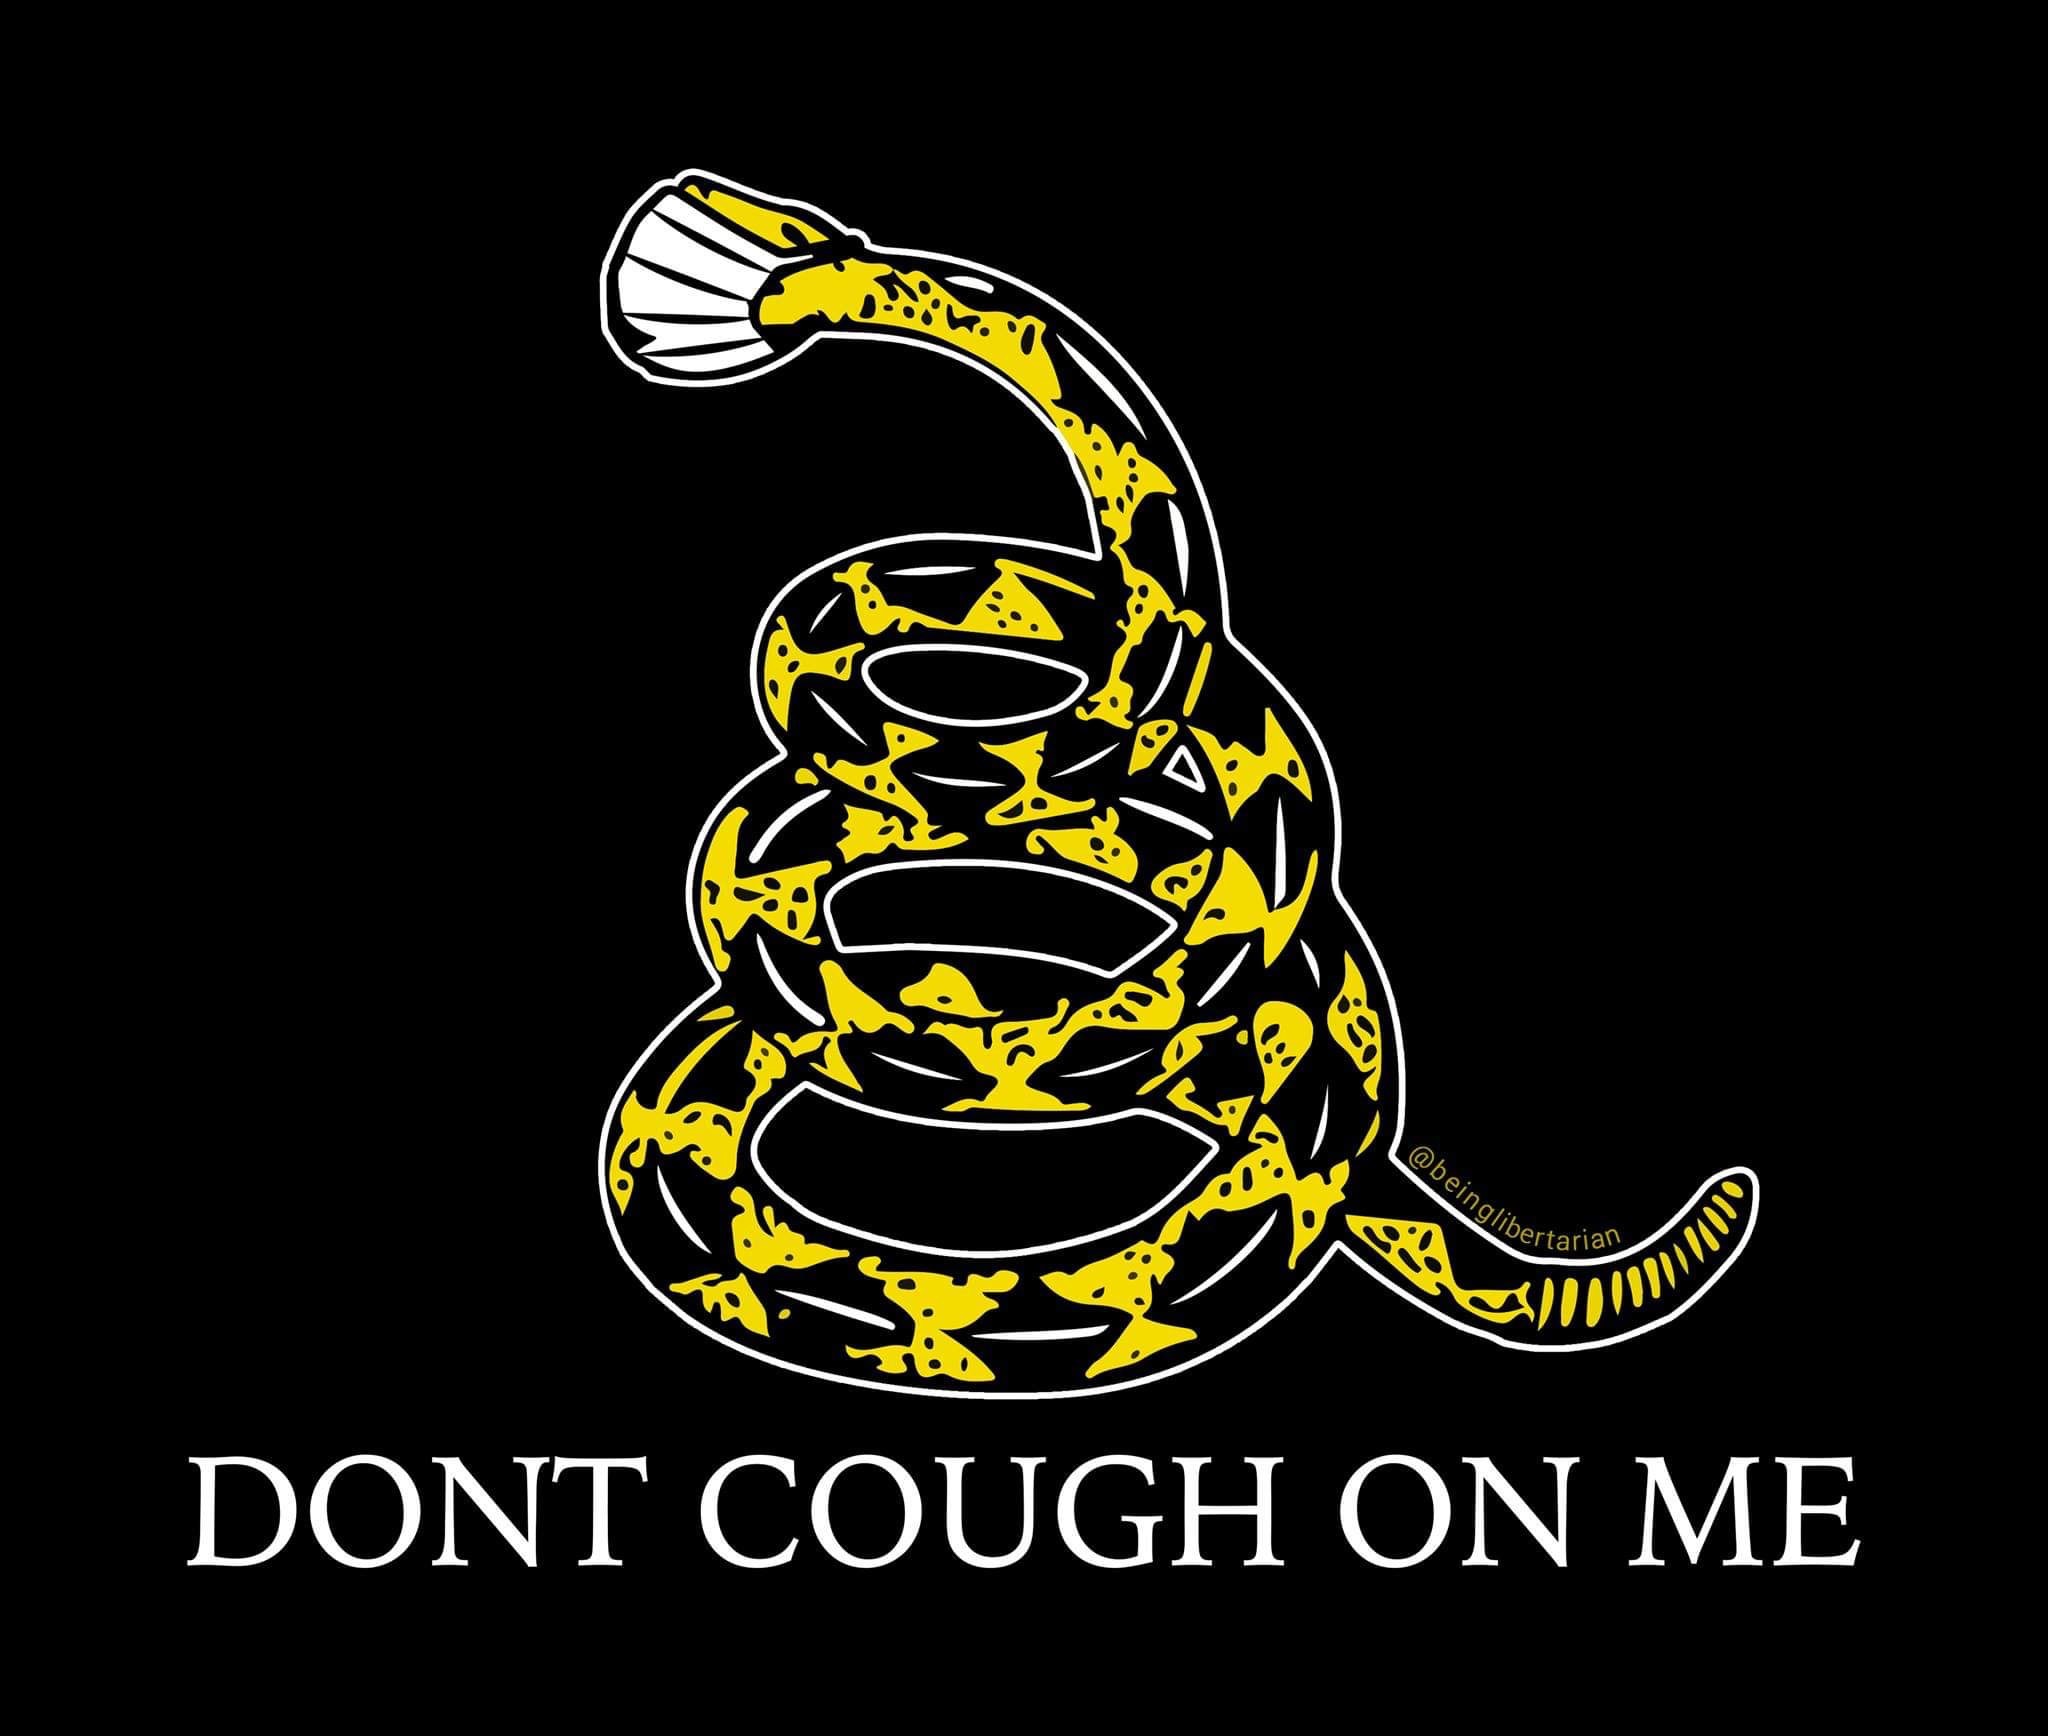 dont tread on me flag - vertarian Dont Cough On Me